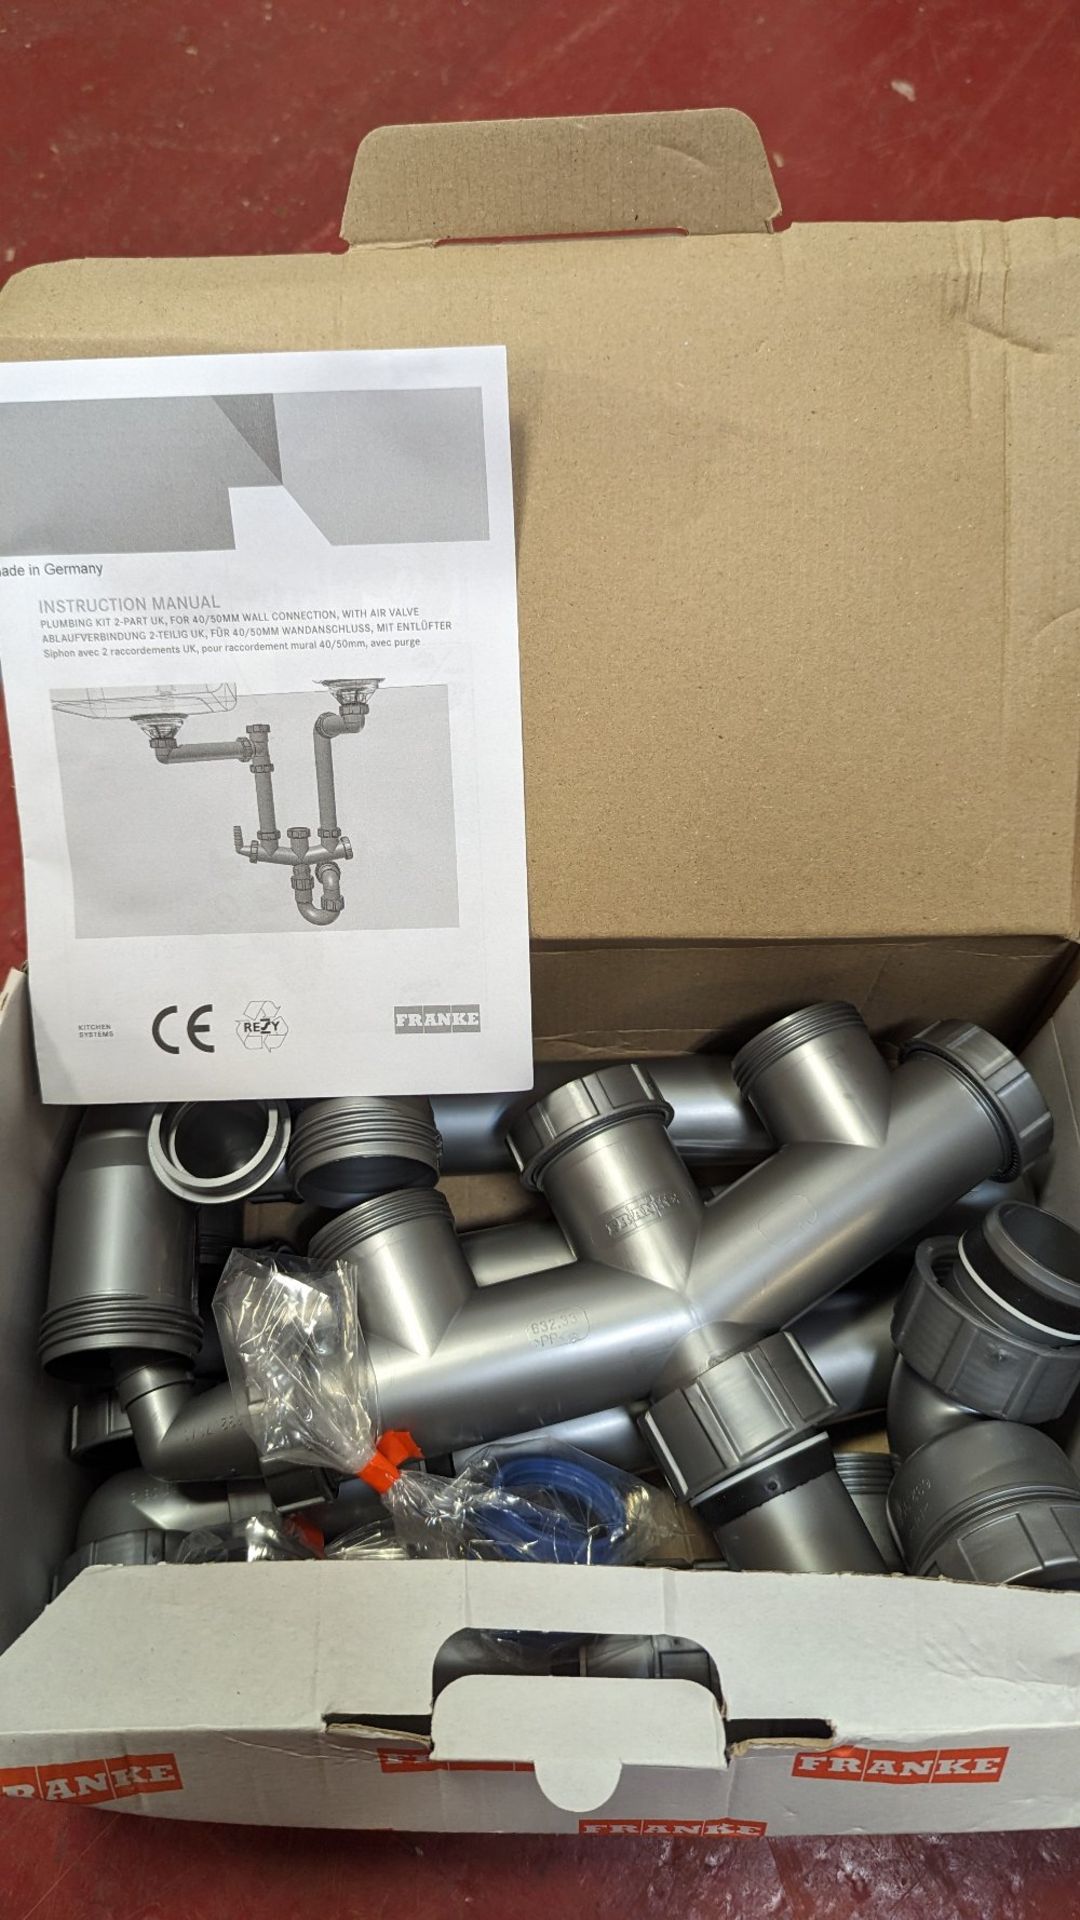 Franke plumbing kit with (2) connections